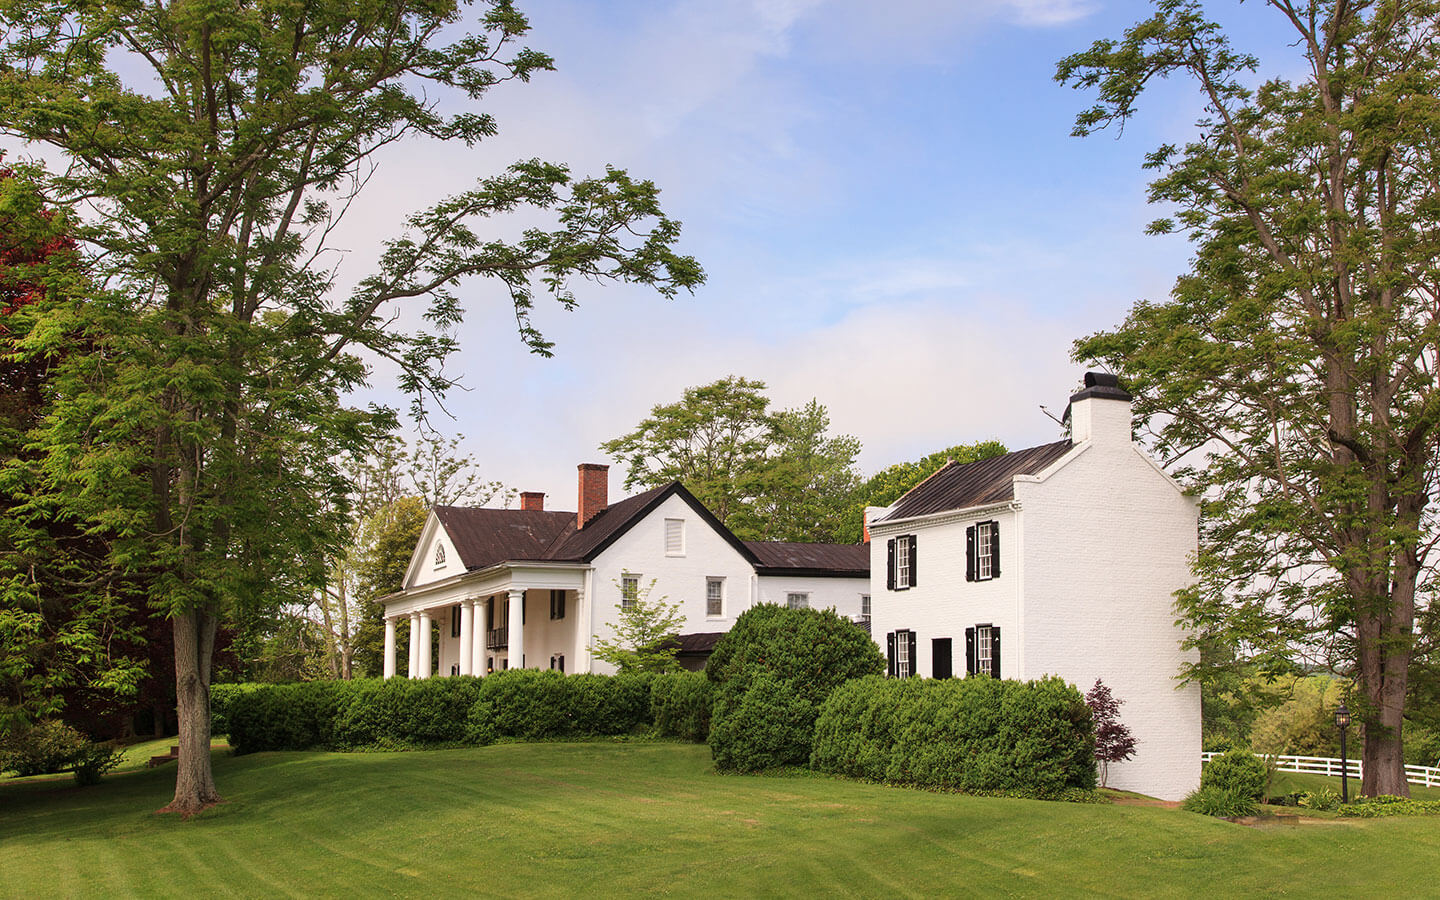 Exterior or our historic Virginia bed and breakfast